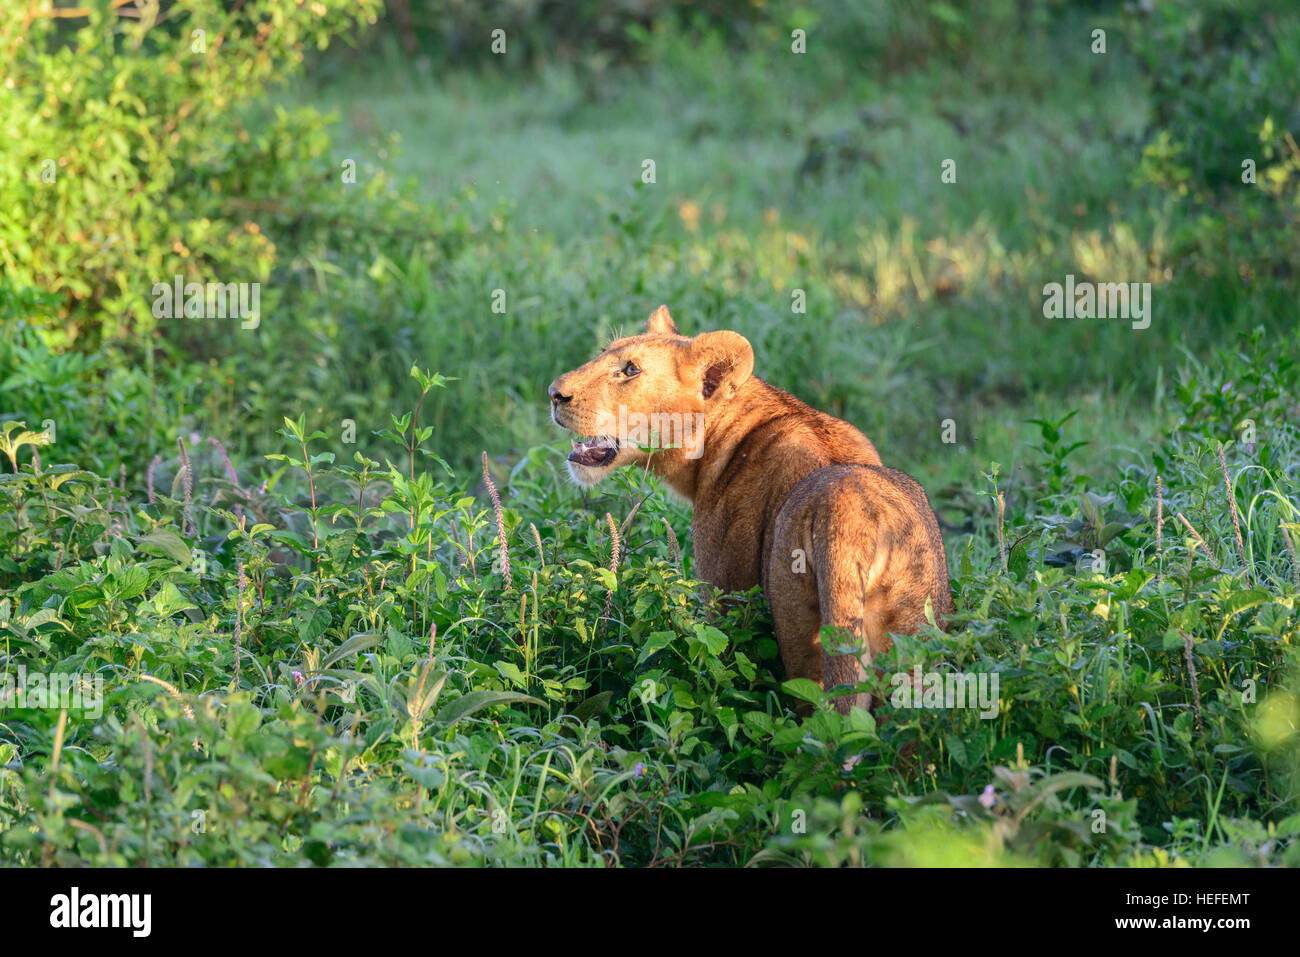 The early dawn lights this wild adult female lion lioness (Panthera leo) as she prowls in savanna savannah vegetation, Tanzania. Stock Photo